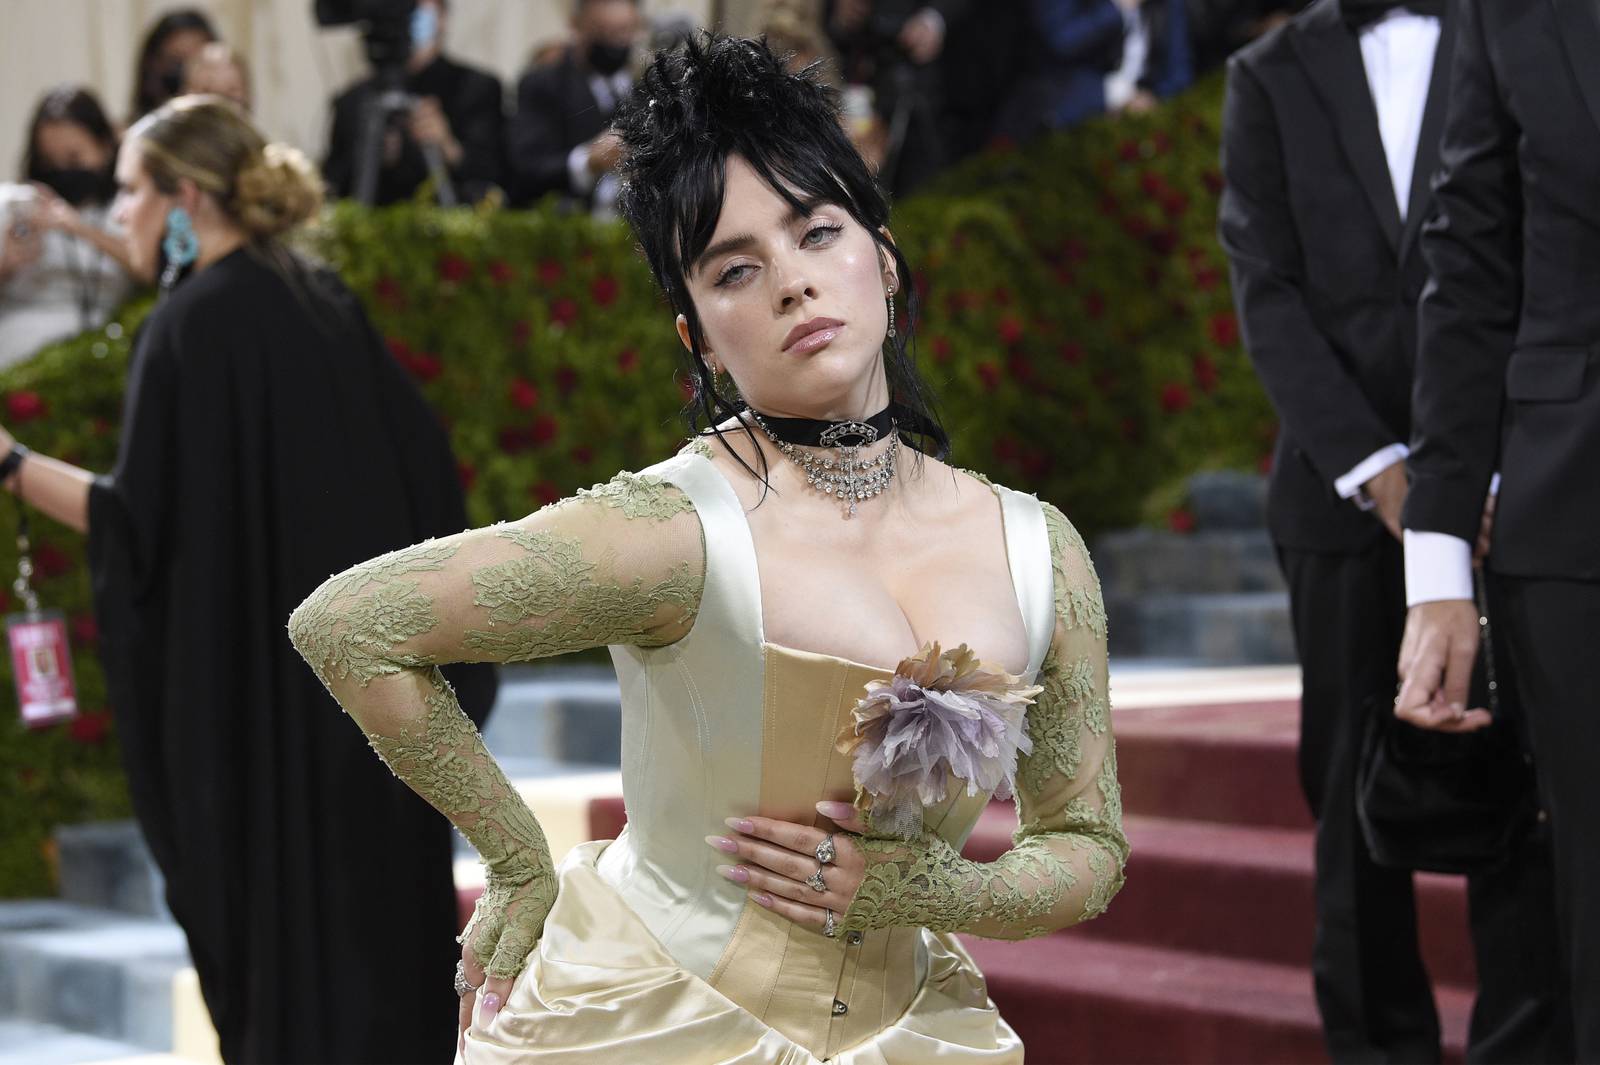 Billie Eilish's upcycled Met Gala look was inspired by a John Singer ...